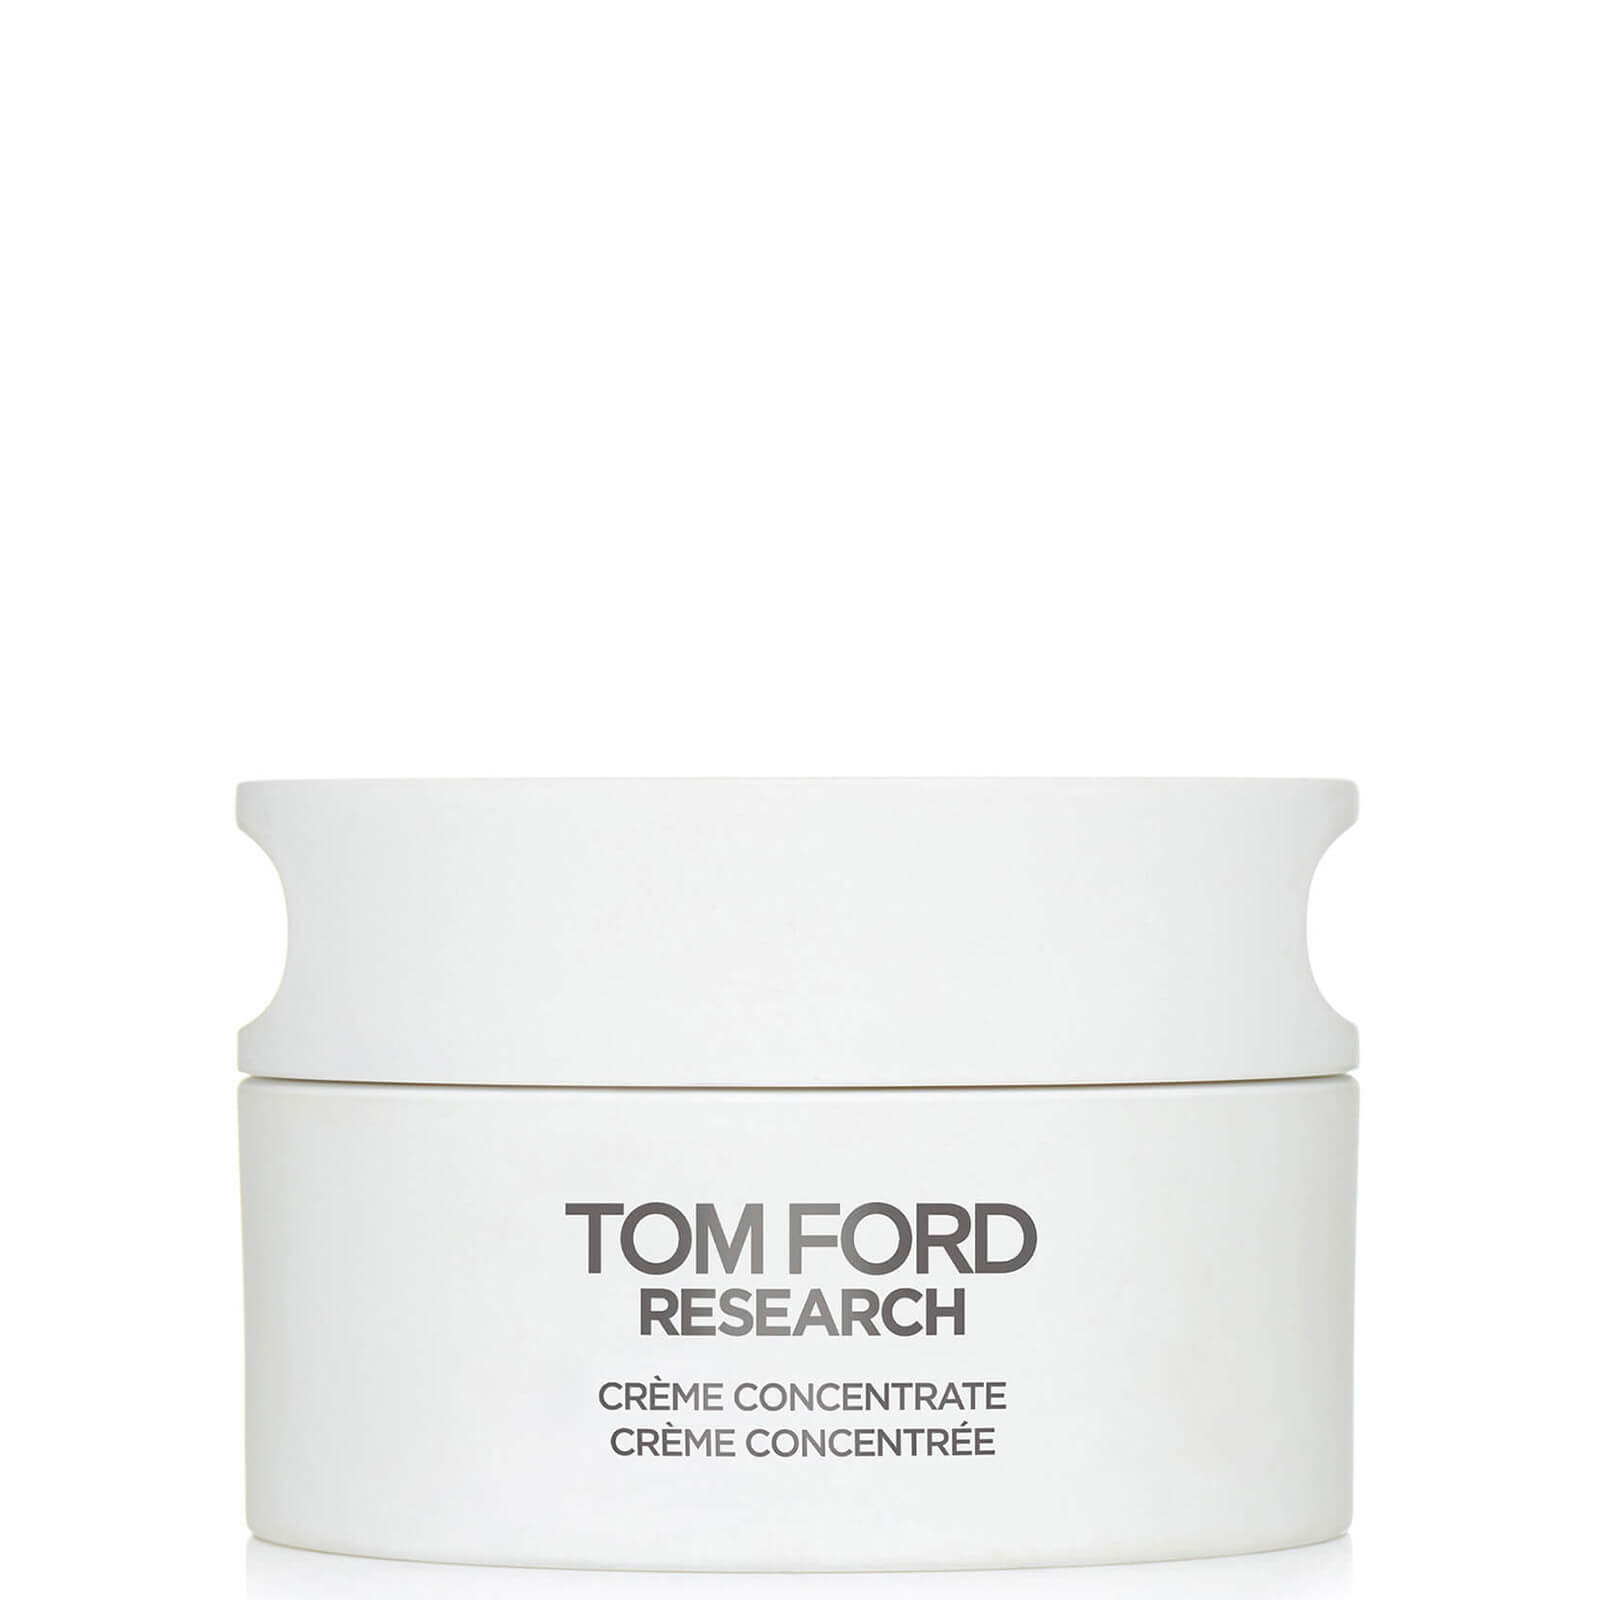 Image of Tom Ford Research Crème 50ml